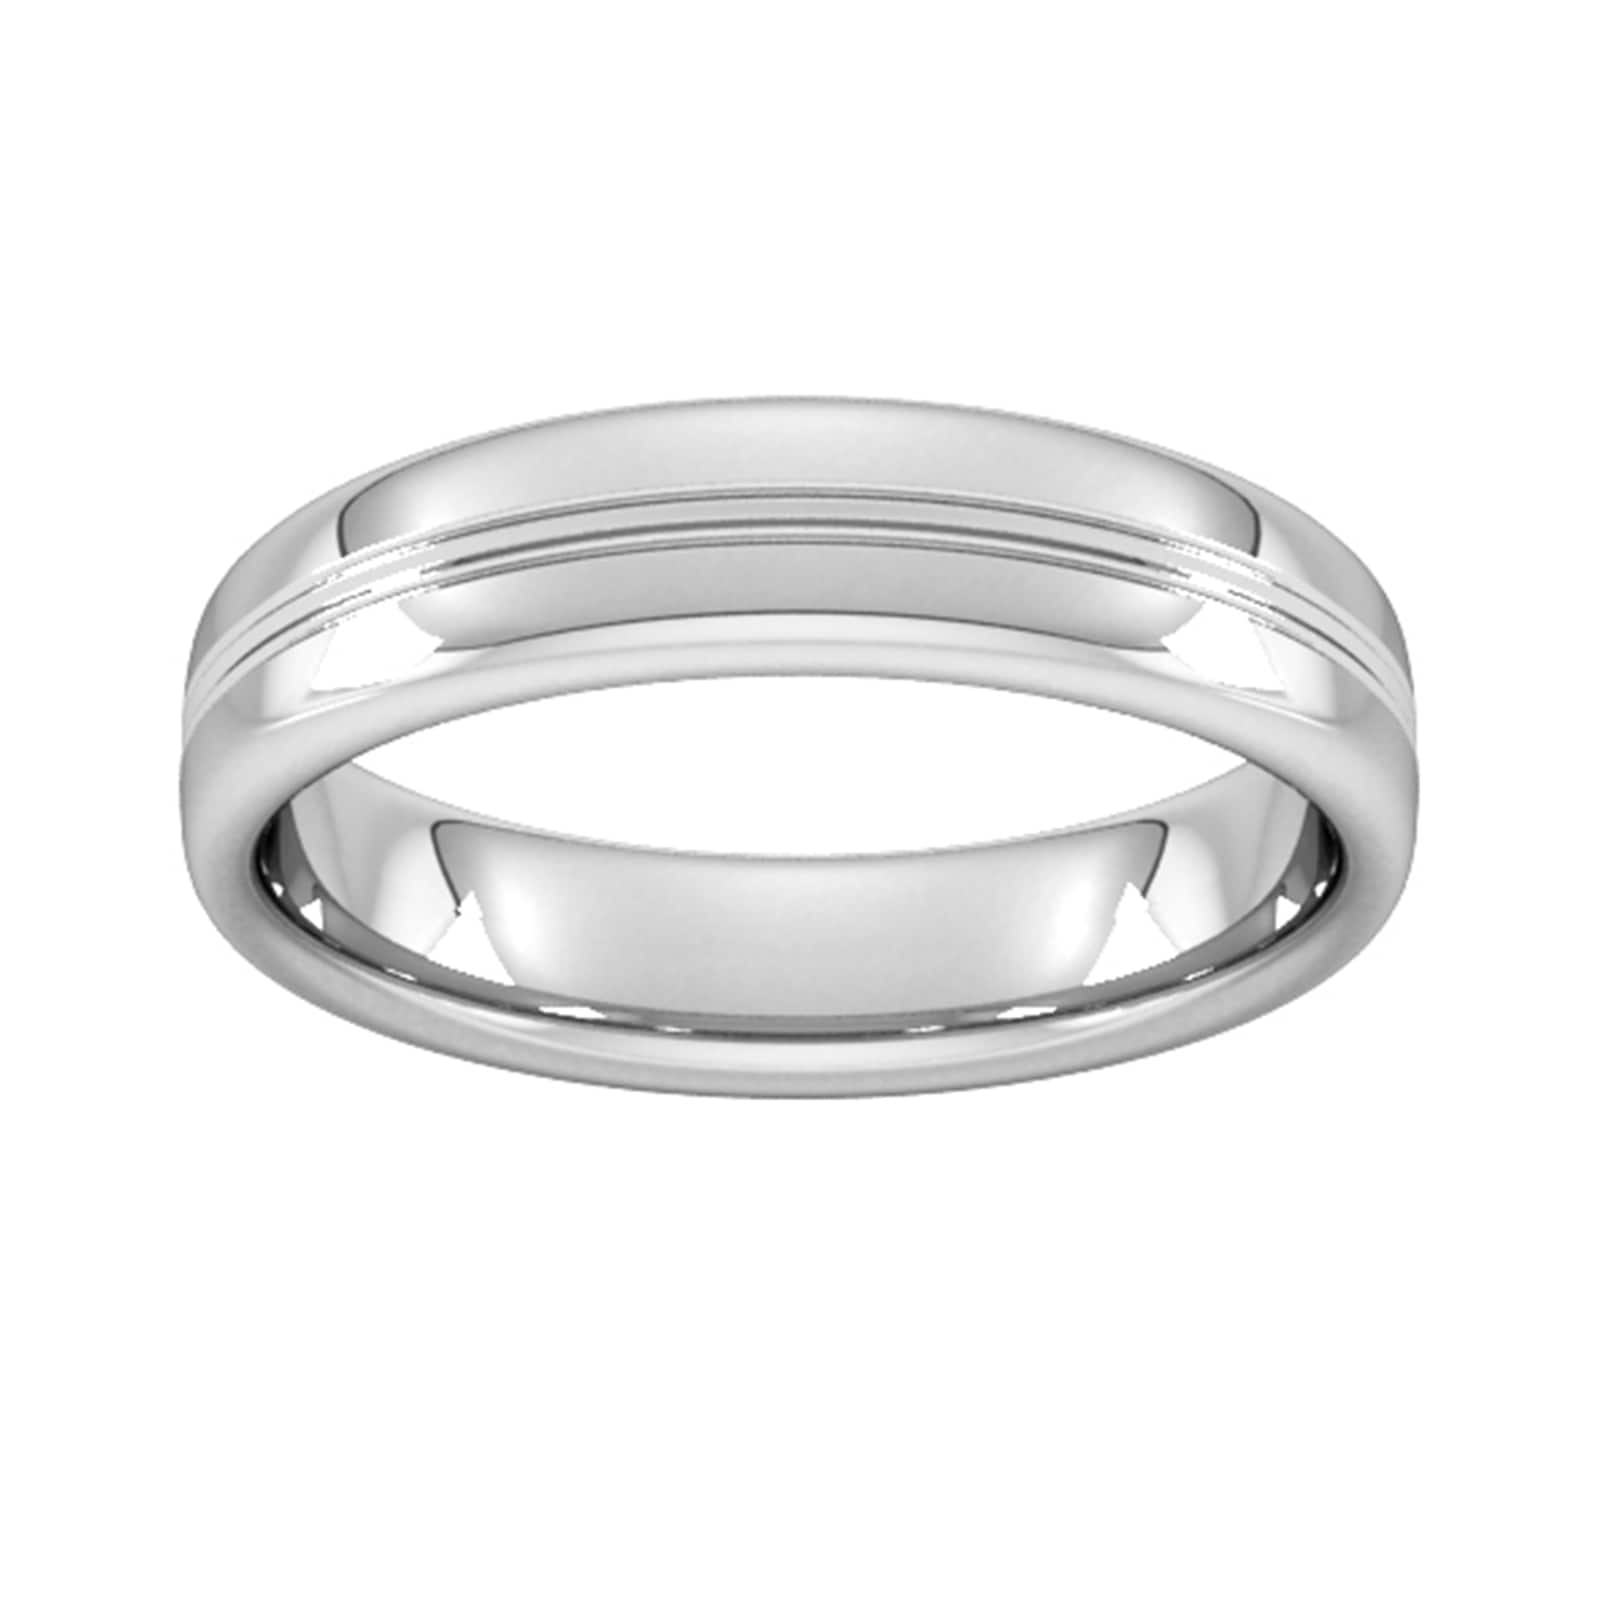 5mm Slight Court Extra Heavy Grooved Polished Finish Wedding Ring In 18 Carat White Gold - Ring Size I